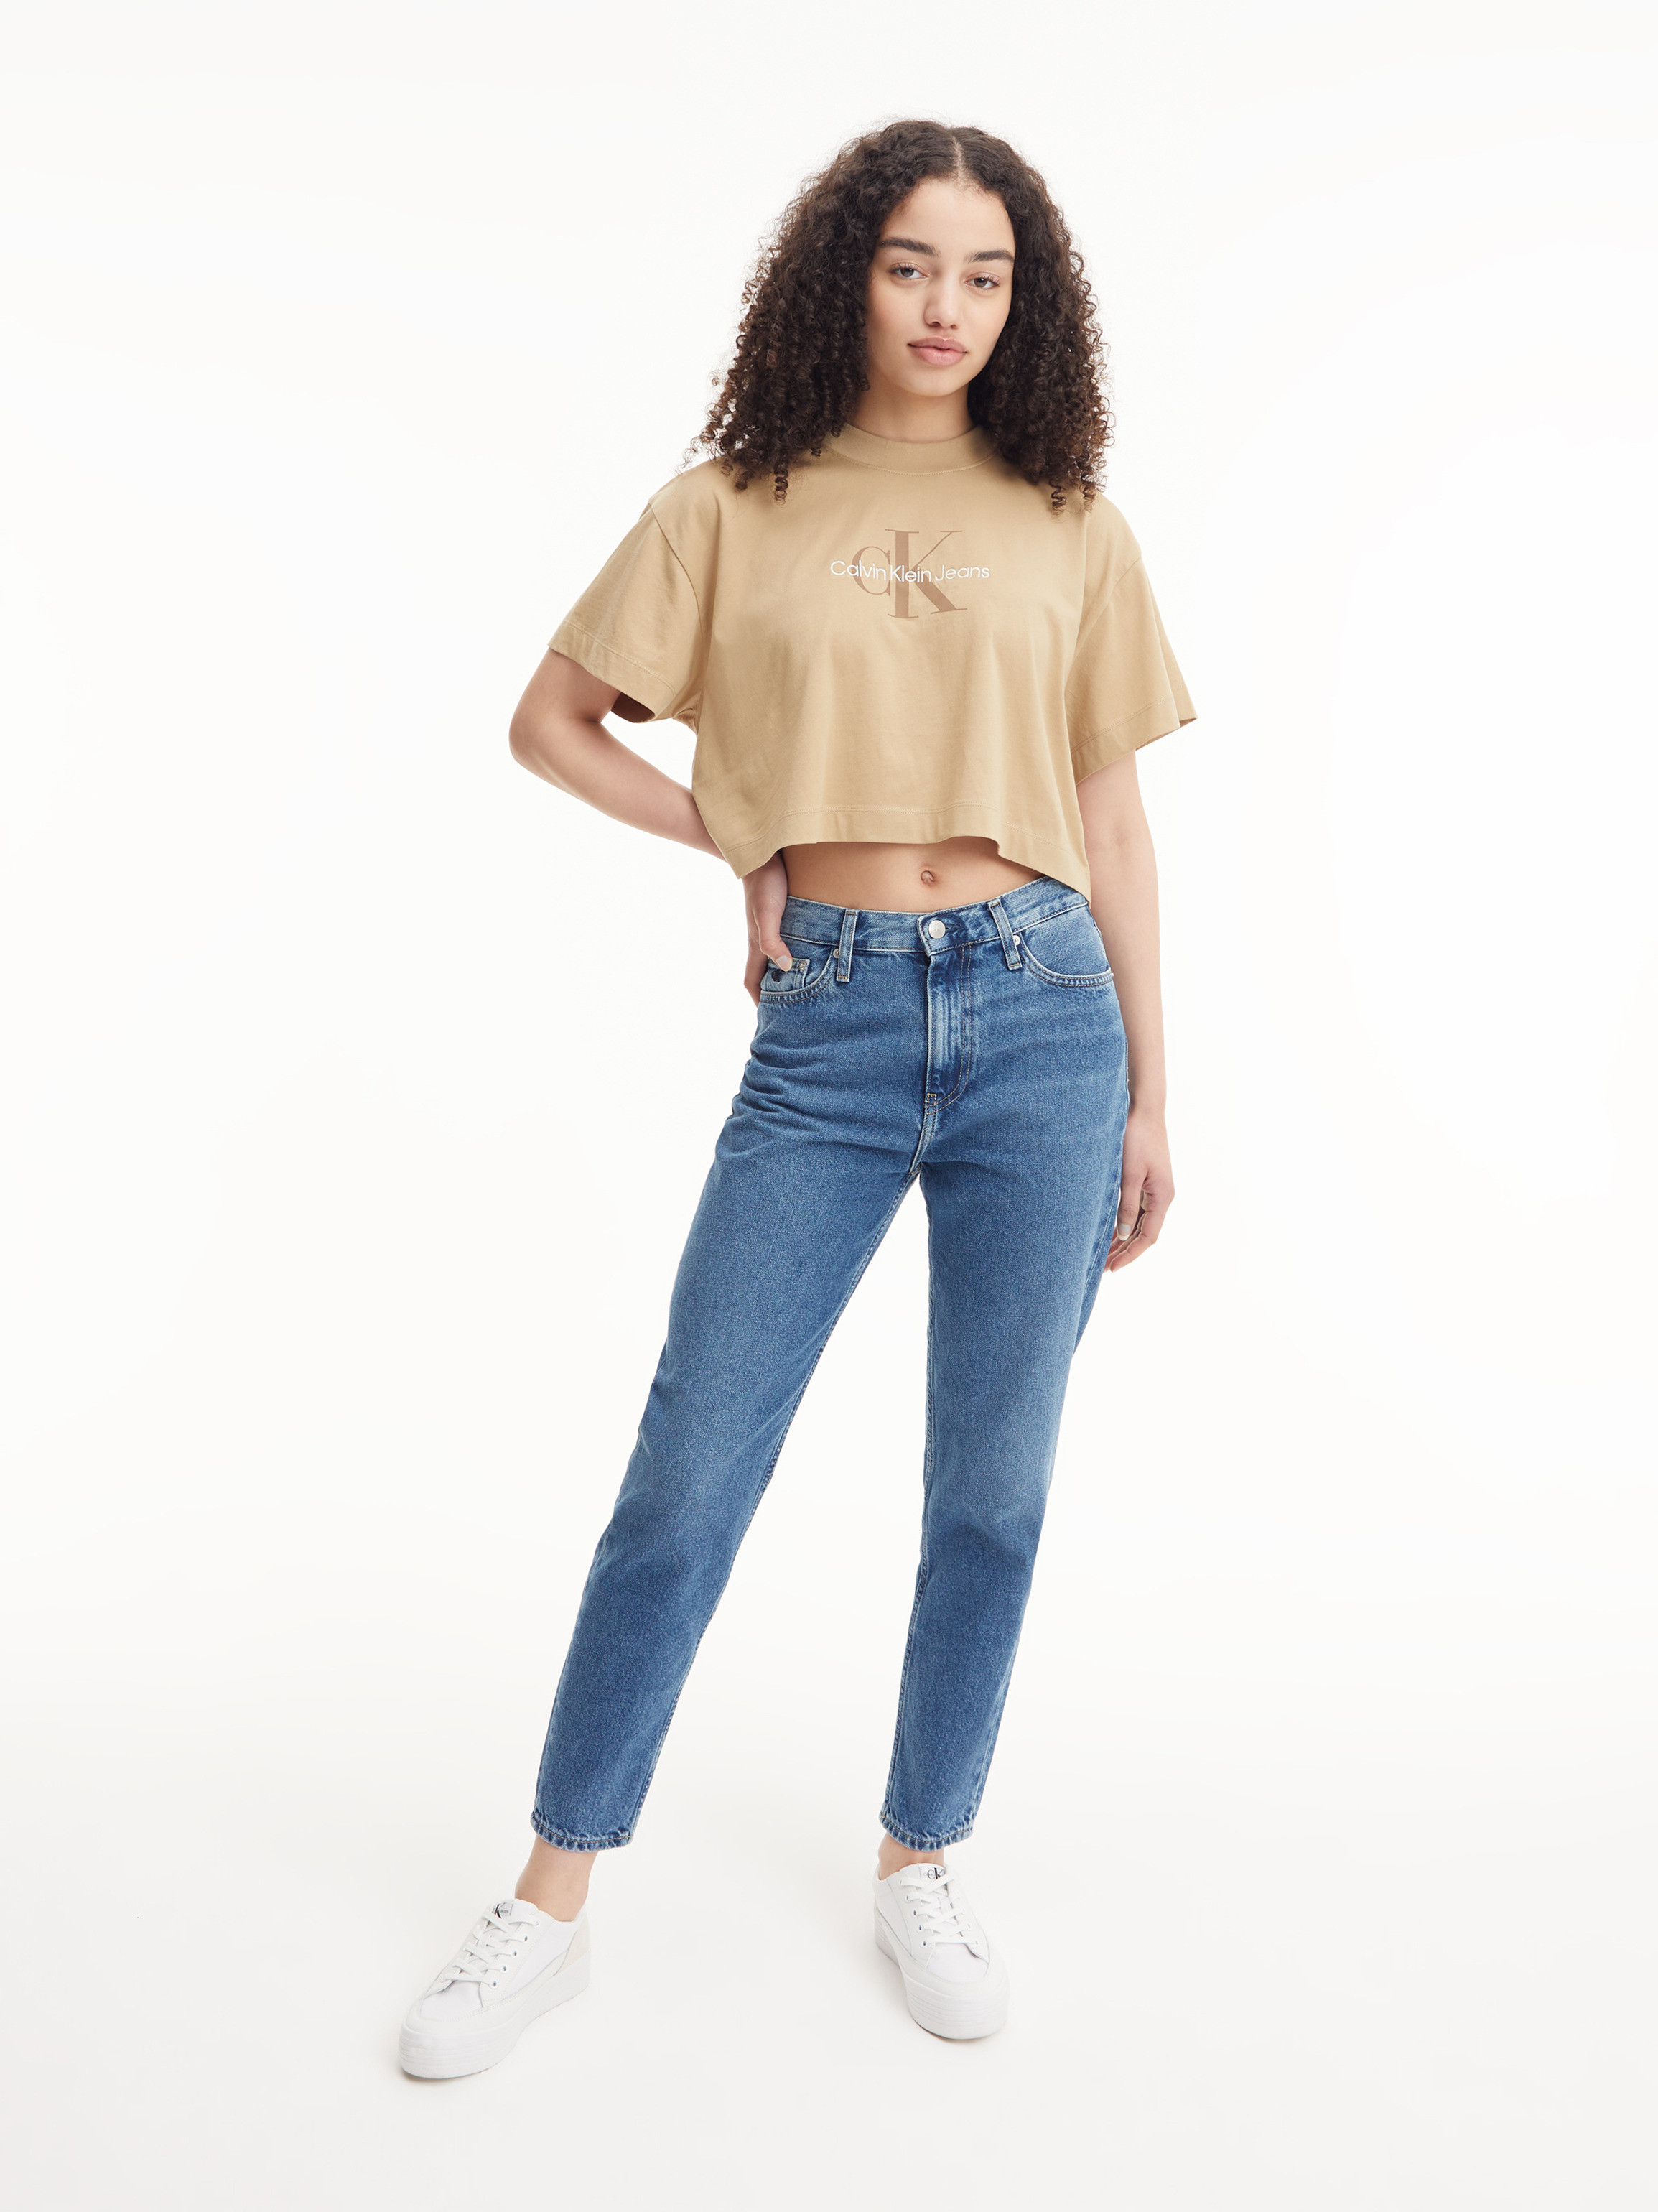 Calvin Klein Jeans - T-shirt crop in cotone con logo, Beige, large image number 3